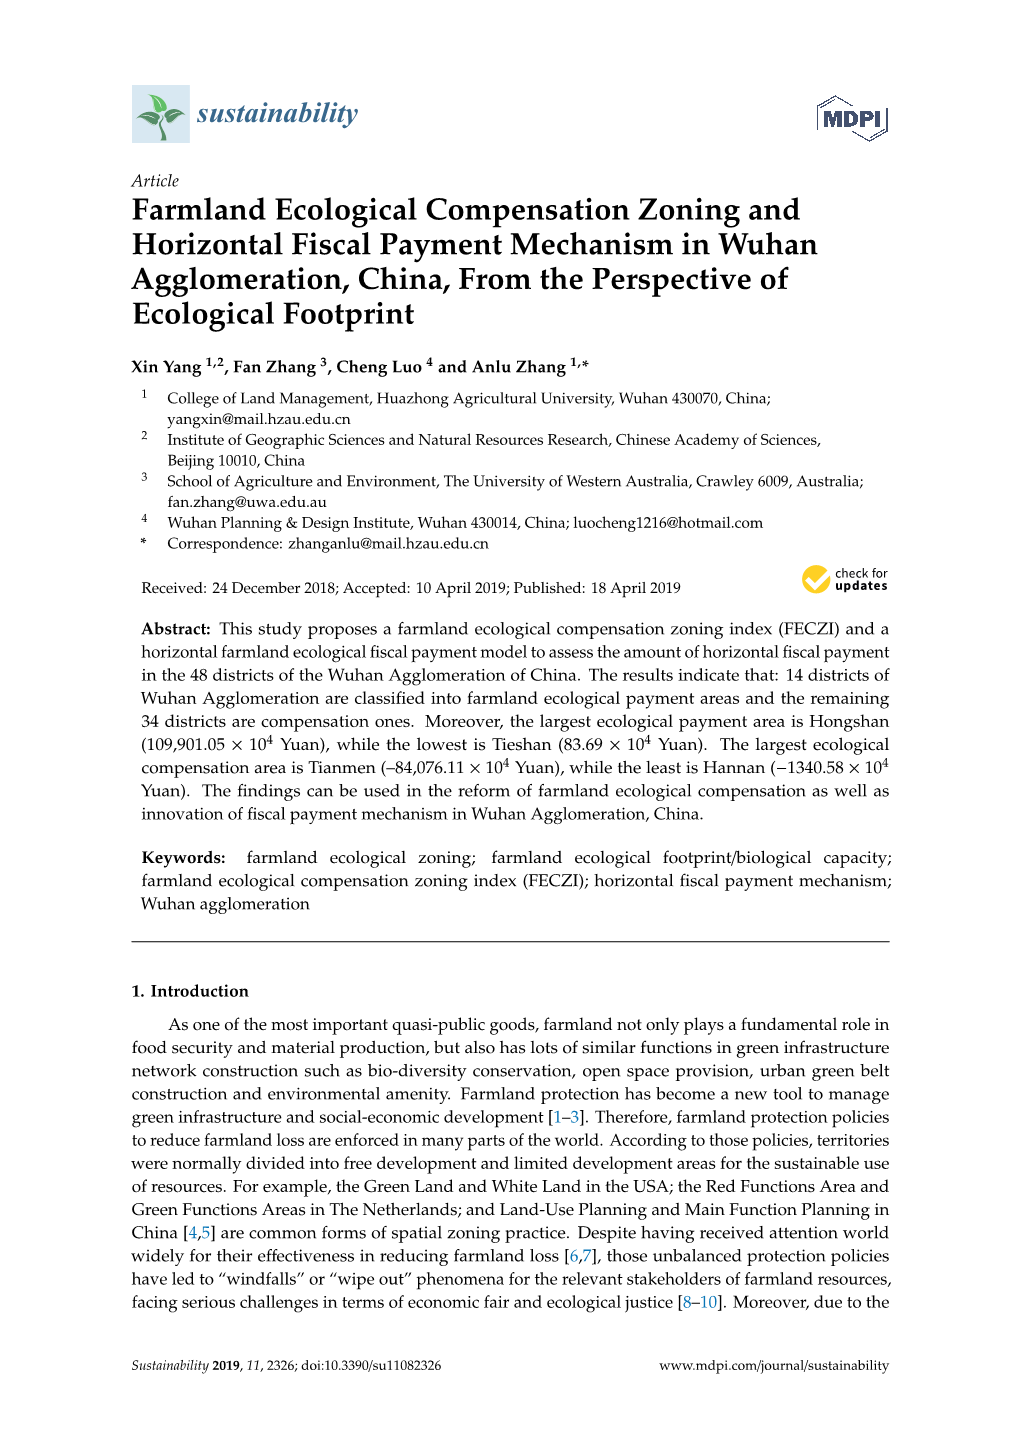 Farmland Ecological Compensation Zoning and Horizontal Fiscal Payment Mechanism in Wuhan Agglomeration, China, from the Perspective of Ecological Footprint